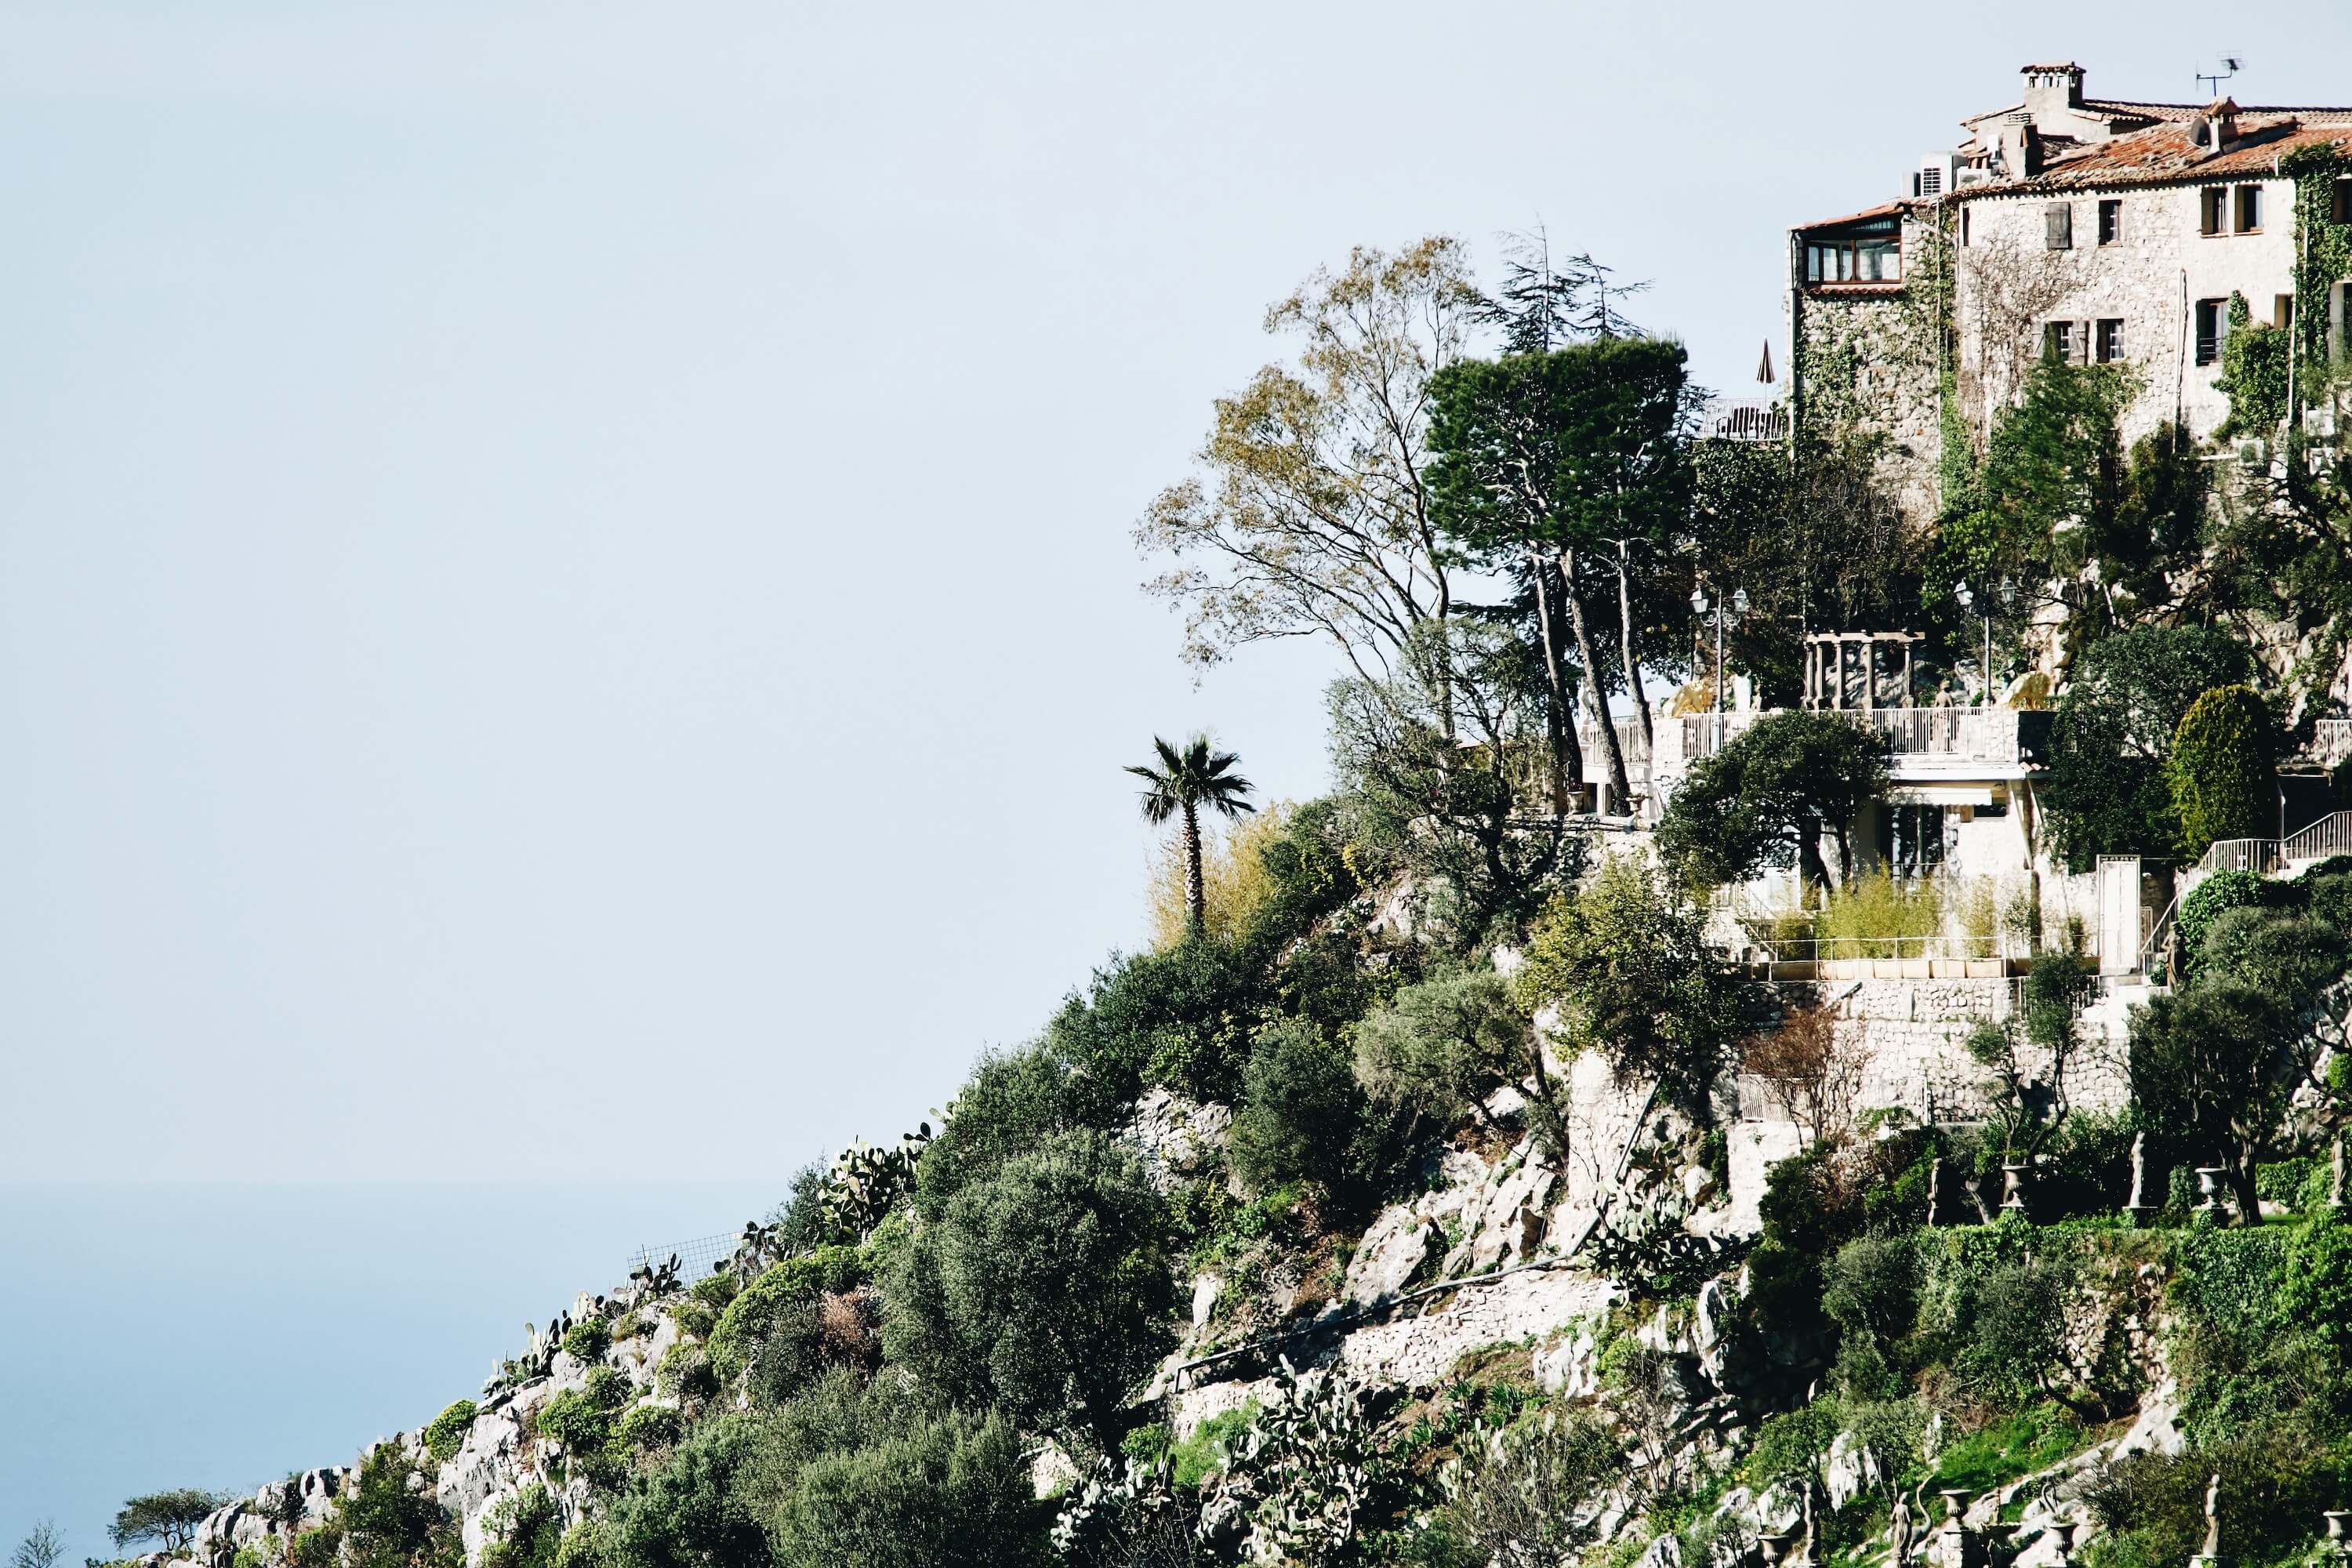 A view of Eze village from the trail